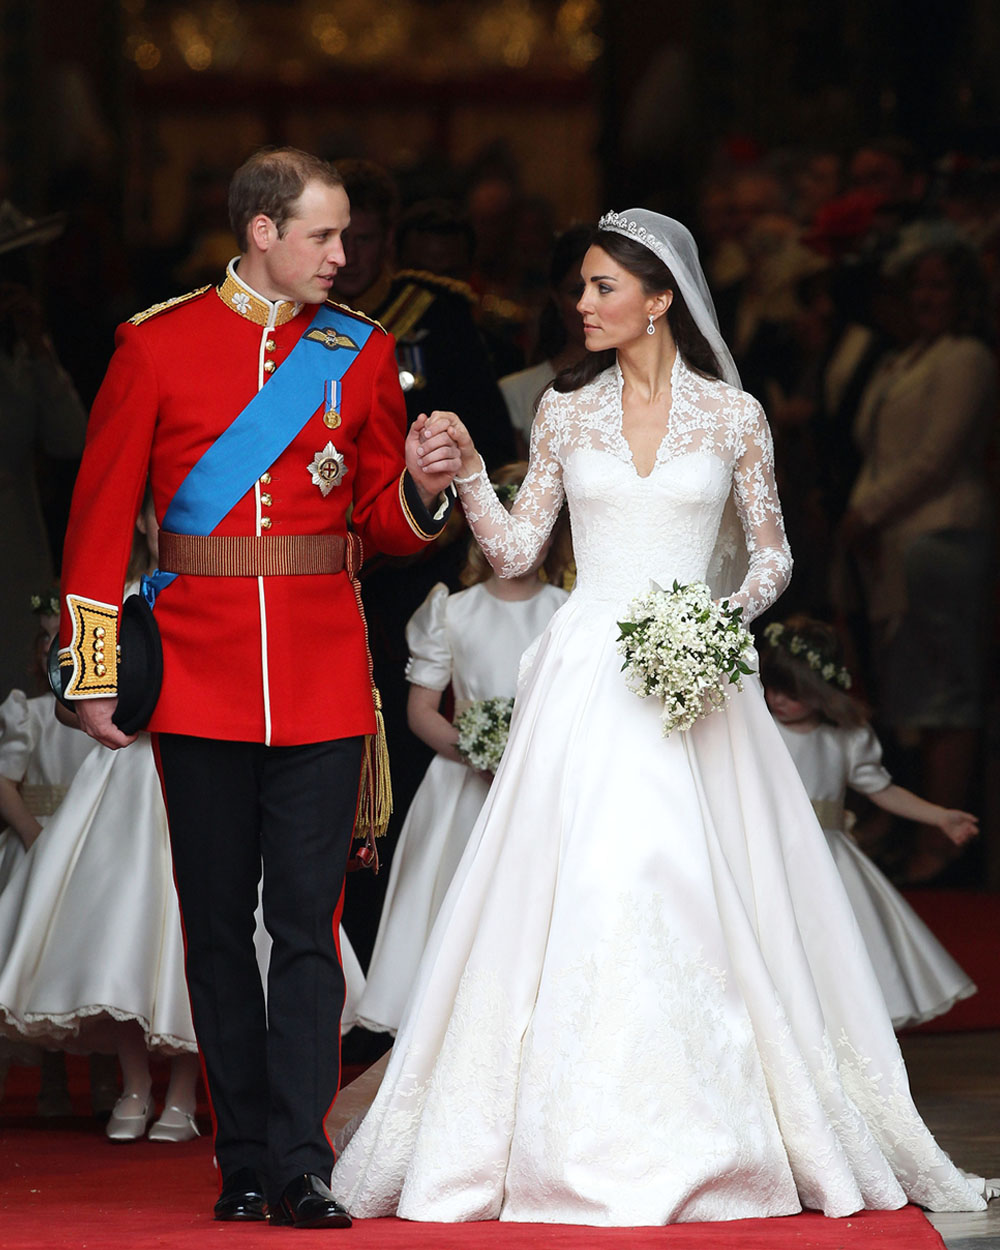 Kate Middleton and Prince William Royal Wedding 2011 Alexander McQueen